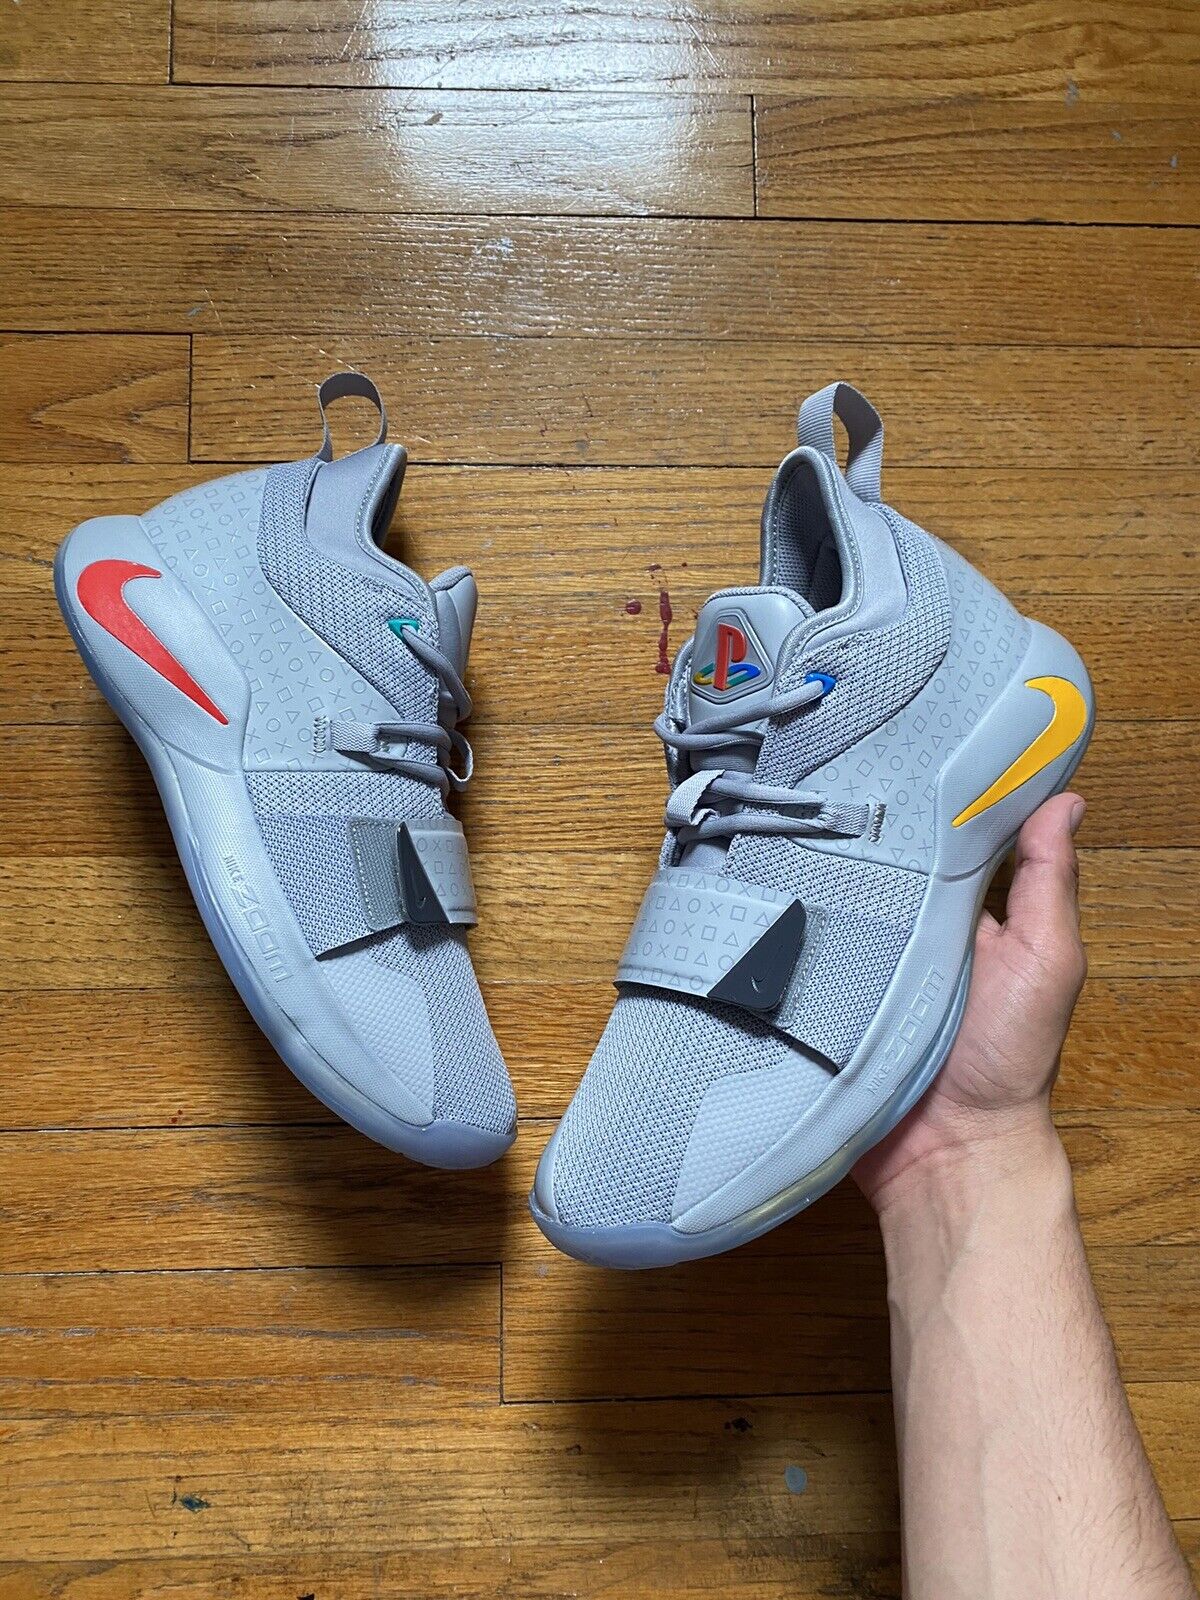 Nike PG 2.5 x PlayStation Grey Multi-Color 2018 Size 9 - Deadstock New |